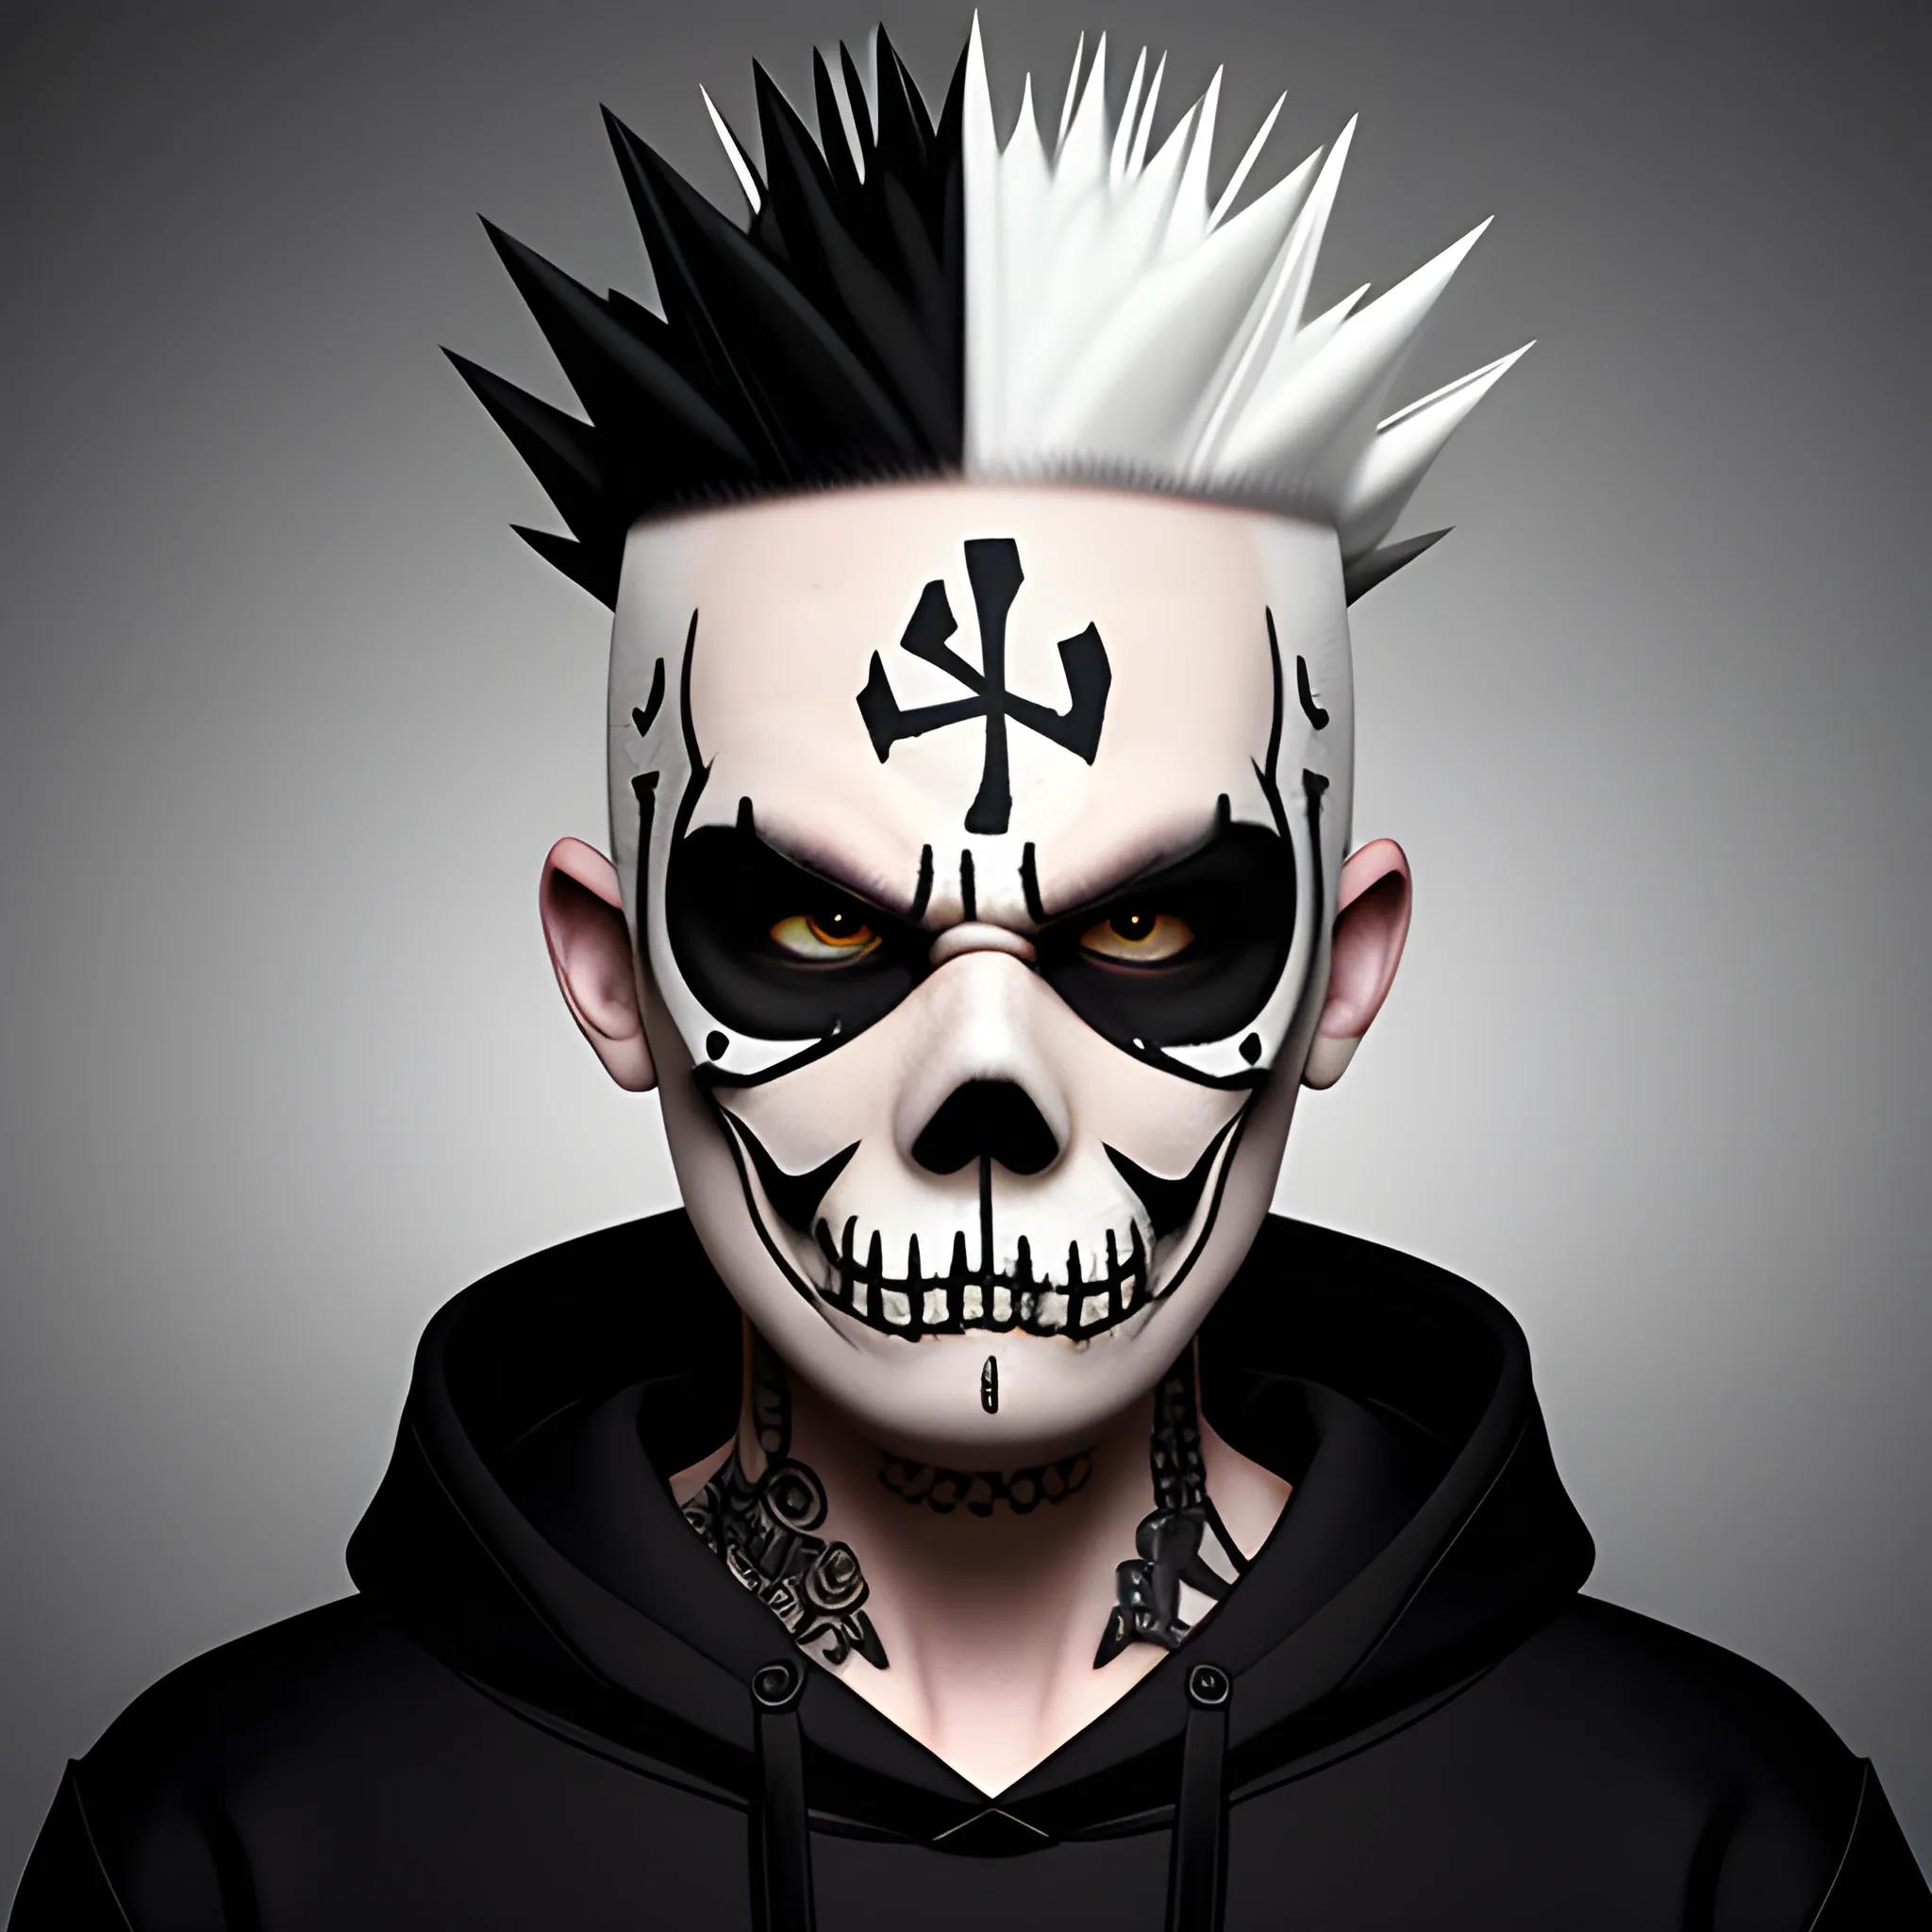 Punk White Character Spiky Head without left eye, realistic mascot, with black hoodie with crossbones
, 3D